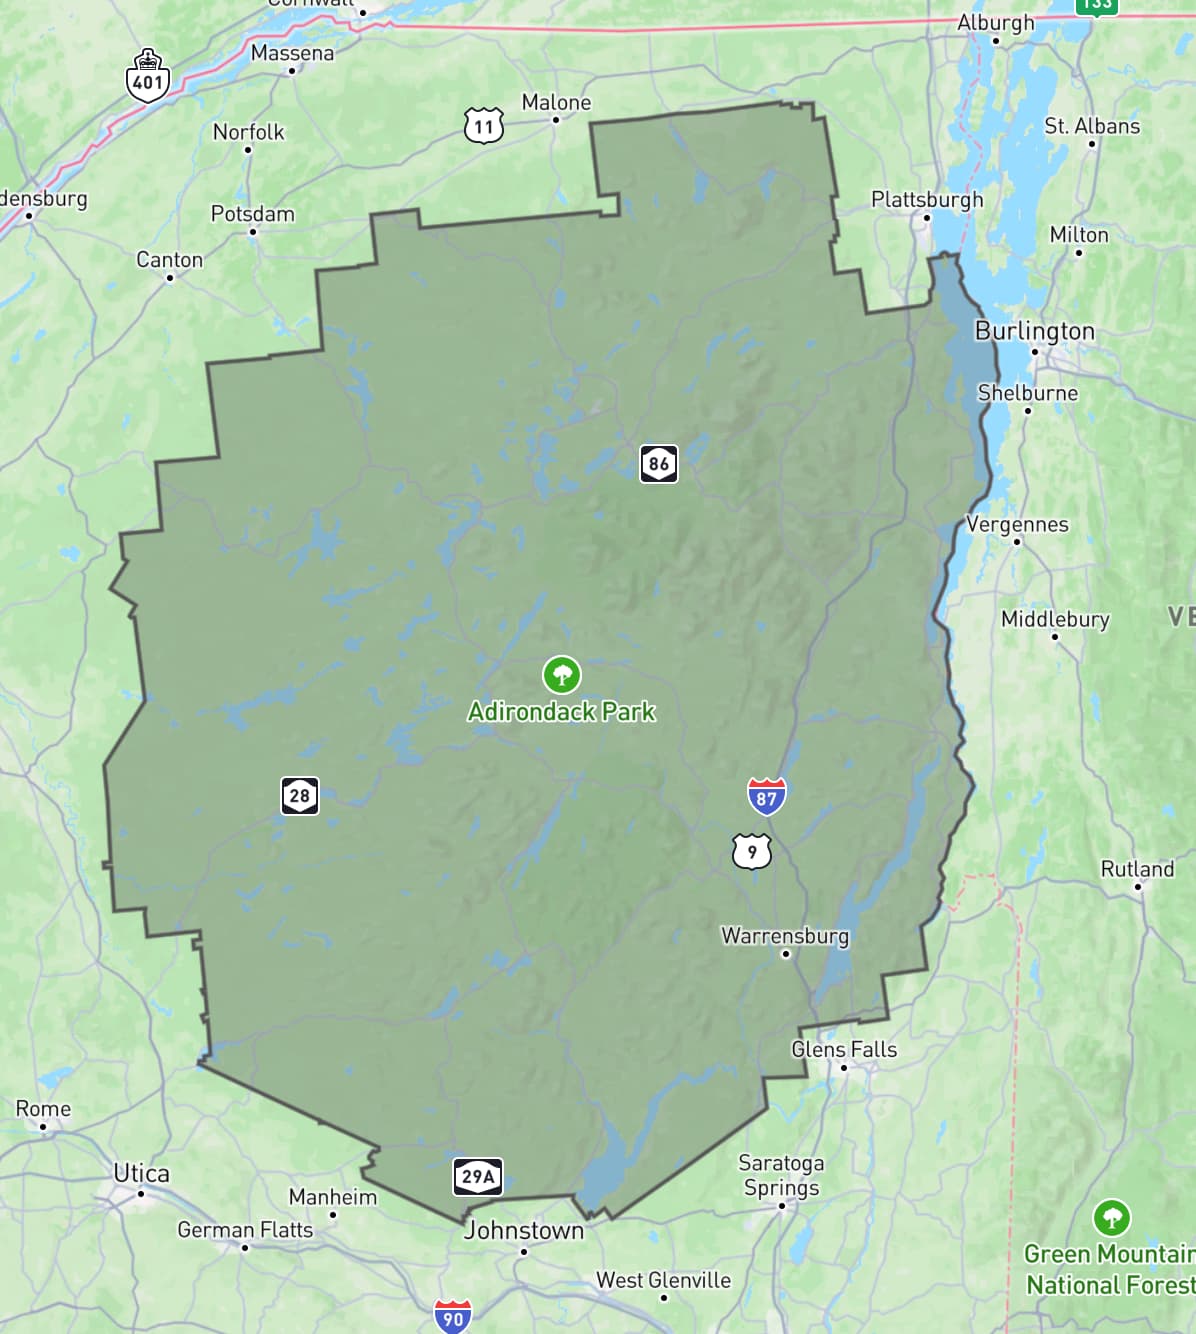 A shaded polygon showing the exact shape of the boundary of Adirondack Park, overlayed on a map of the area